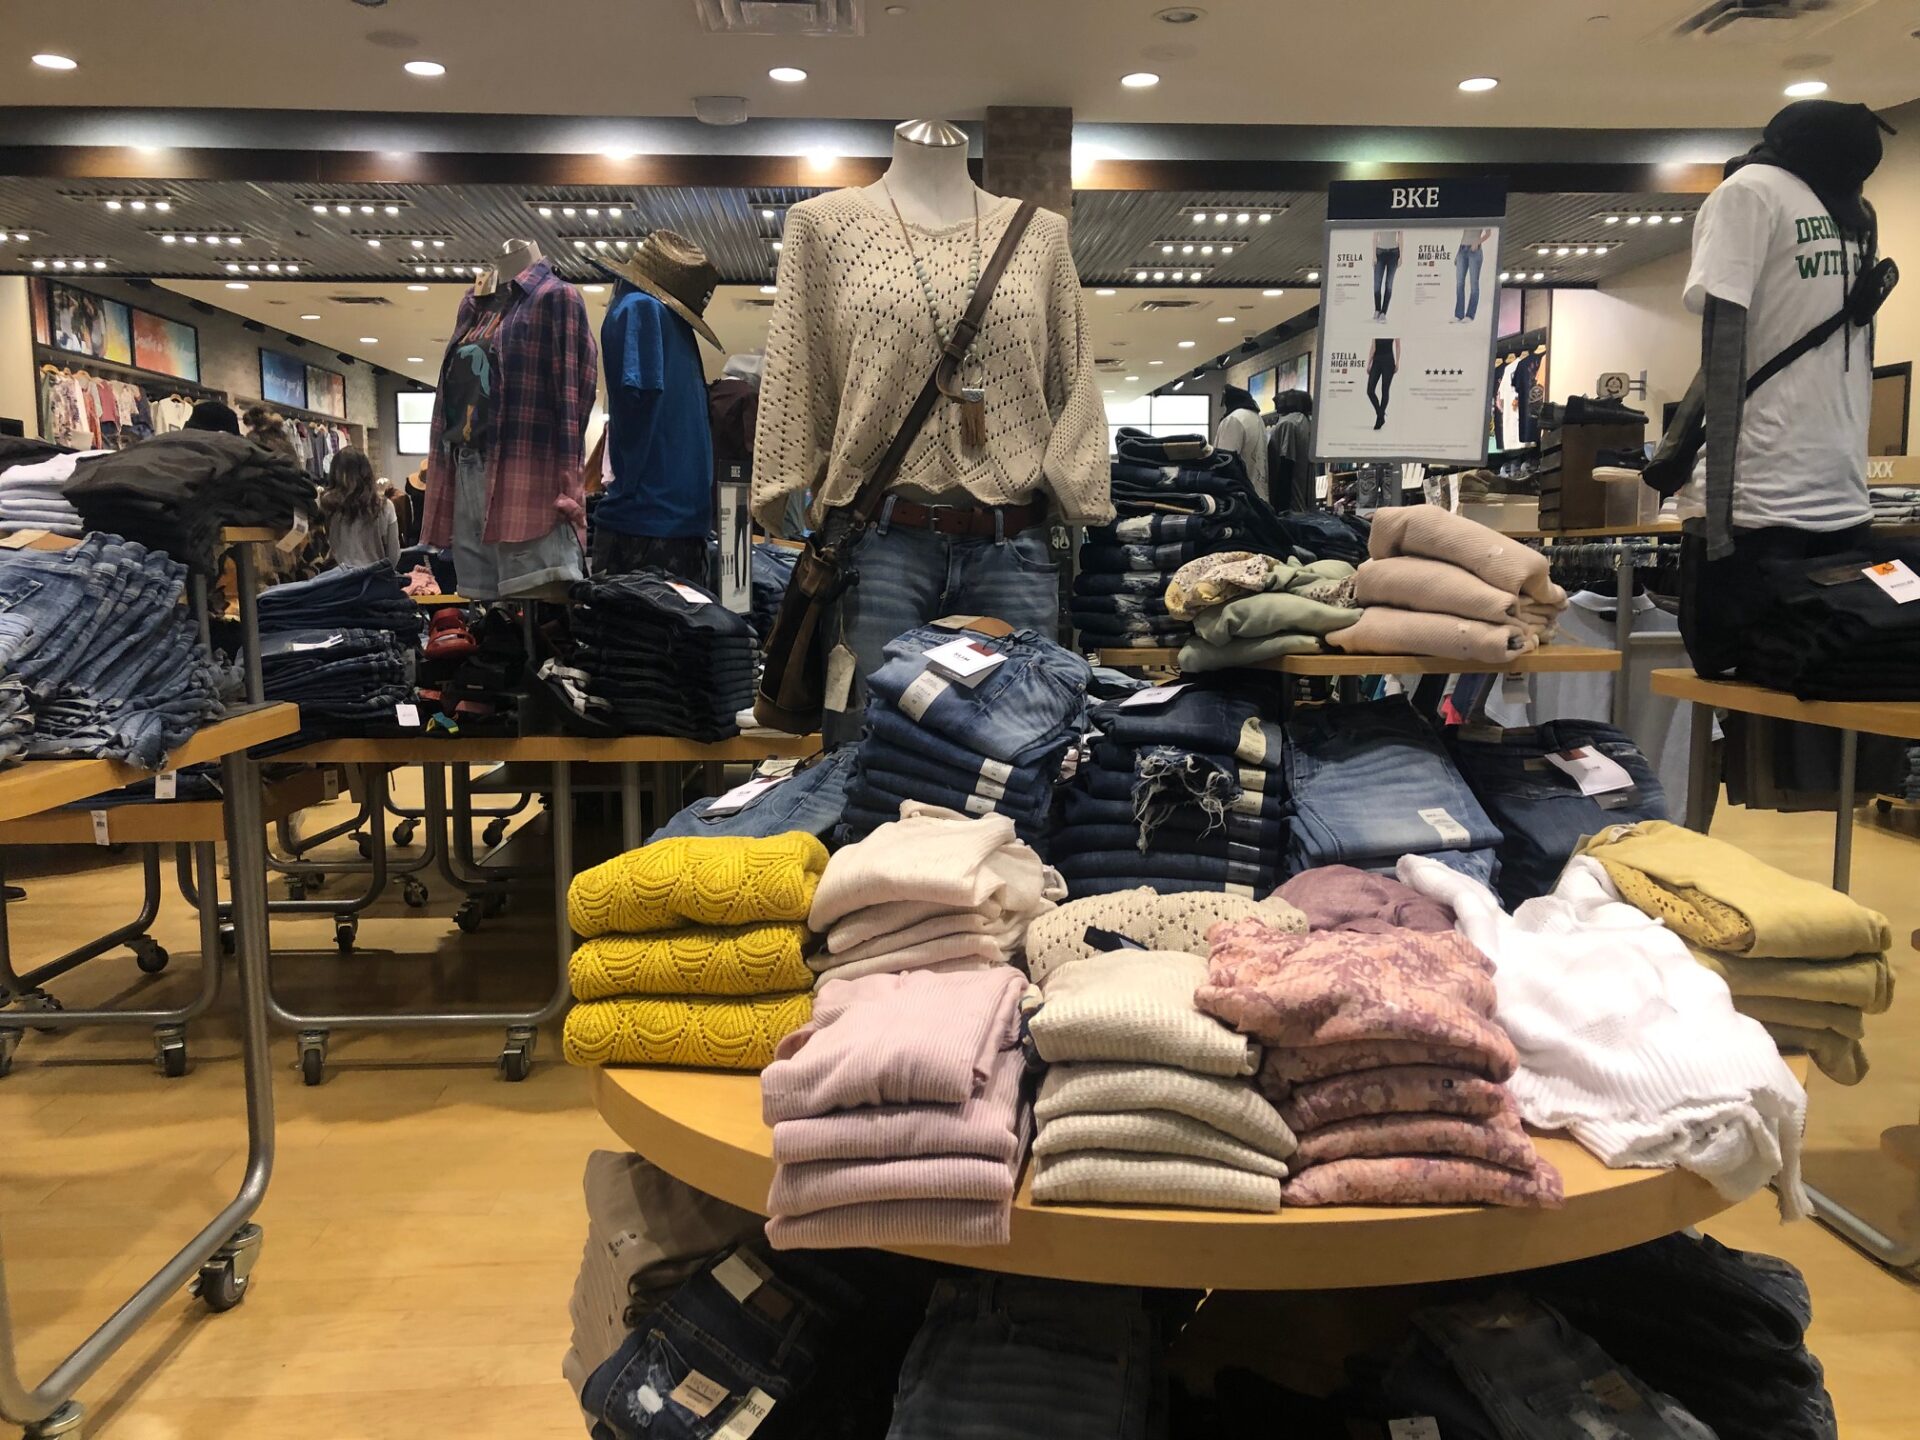 Buckle debuts updated look in one of its top stores 